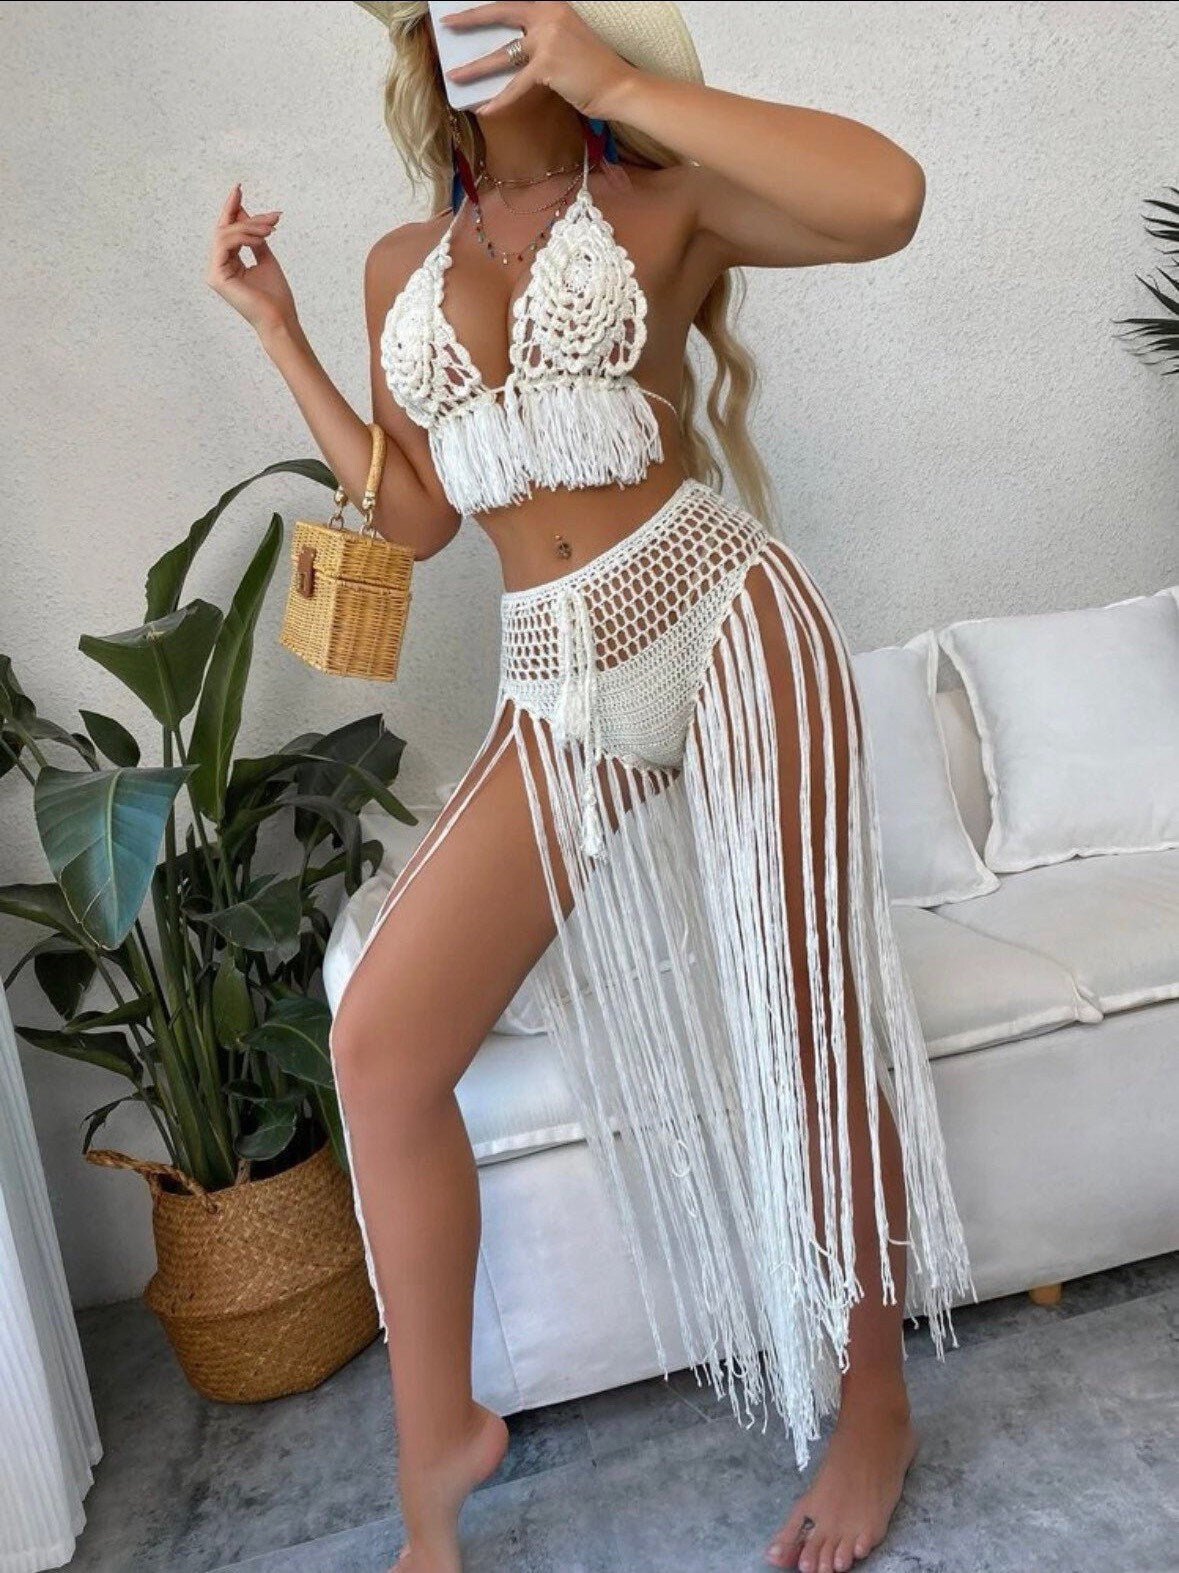 The Sexy Joanna Crochet 2 Piece Crochet Swim Cover Up Set Hand Knitted Fabric Sleeveless Bra top with Shorts Fringe Trim Detail Super Soft